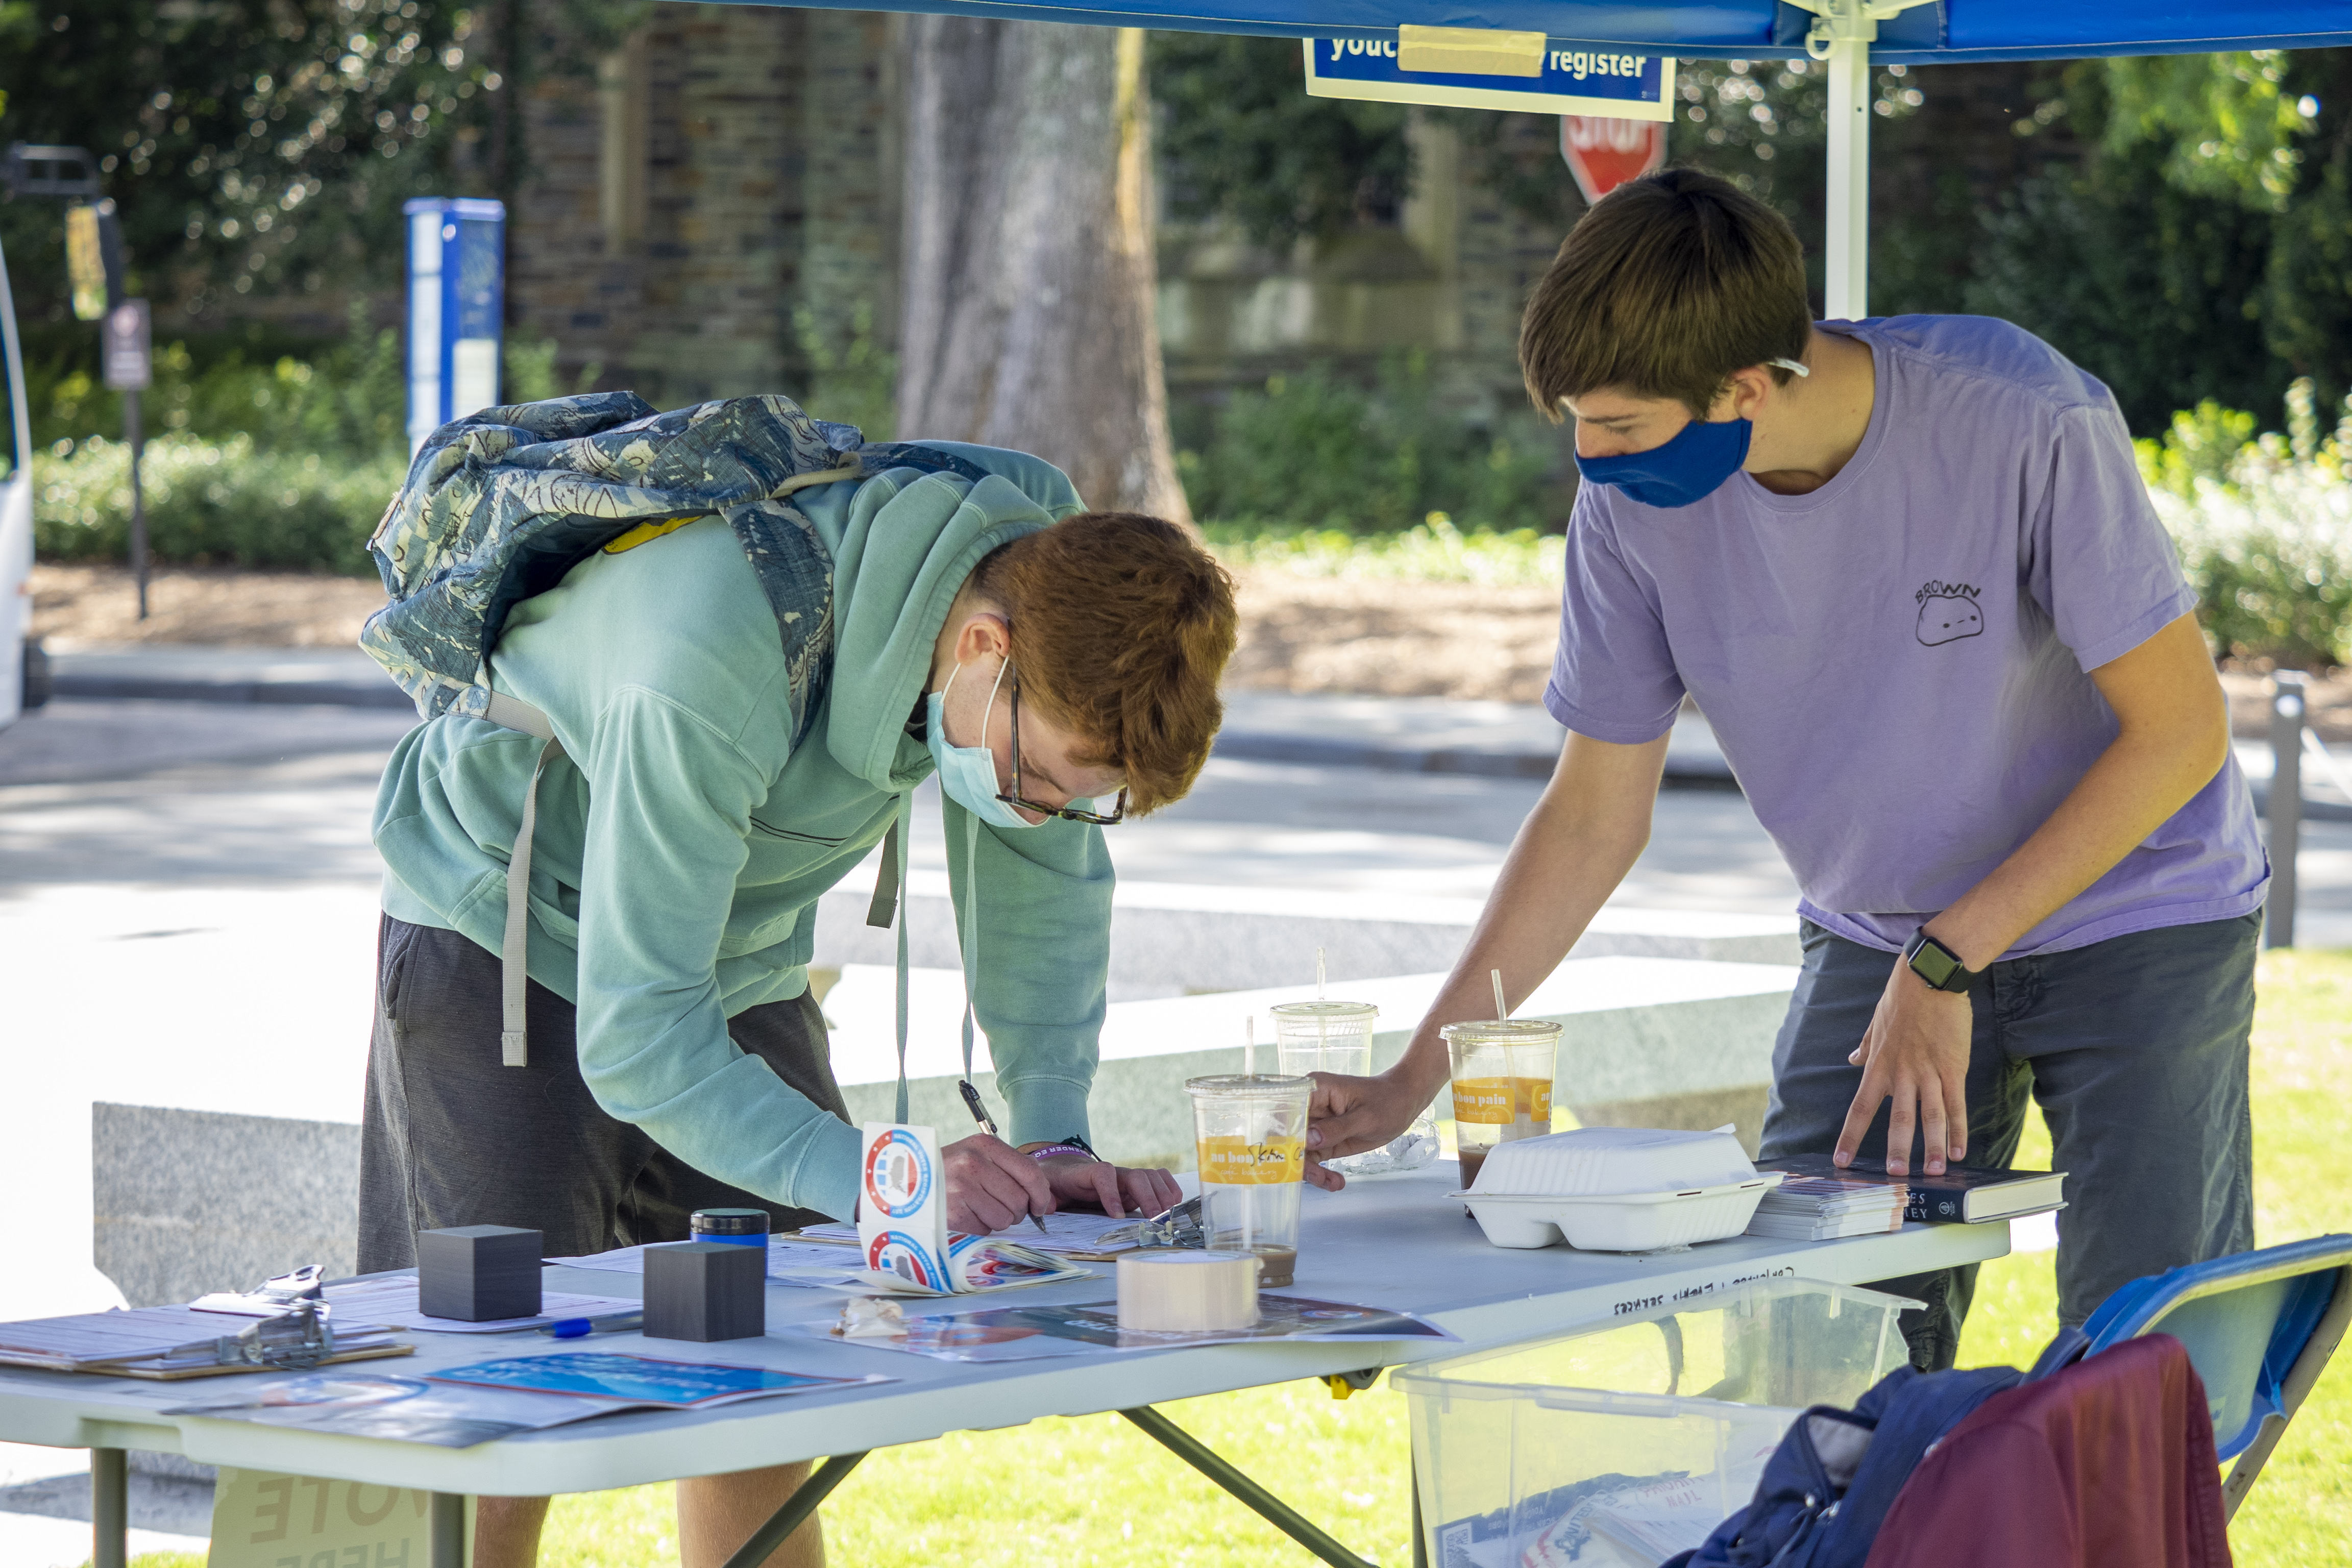 Jonah Perrin helps a student register to vote during the pandemic at a Duke Votes table.